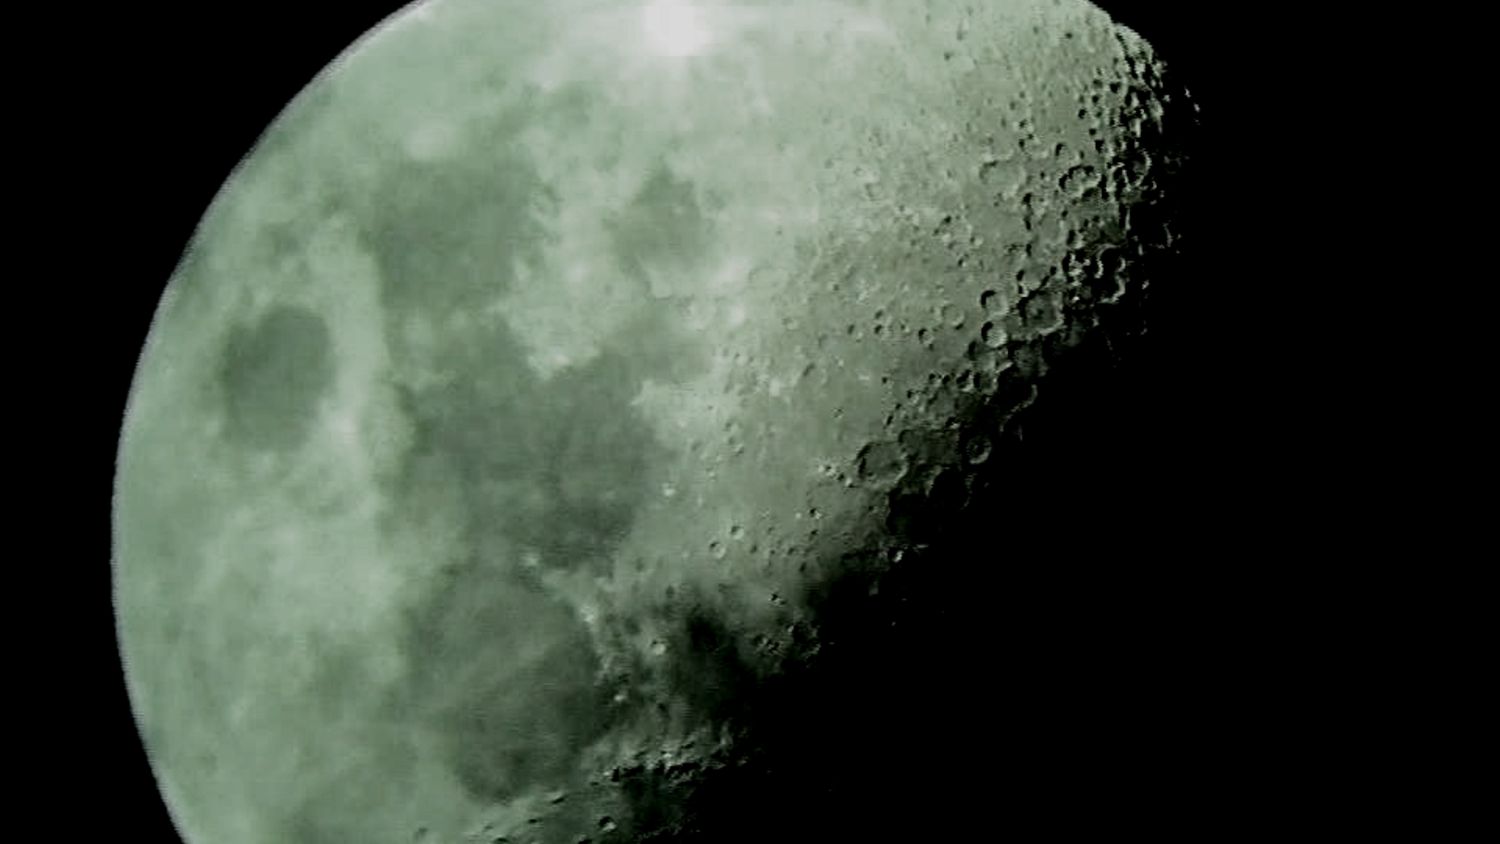 The Moon - Imaging with a camcorder